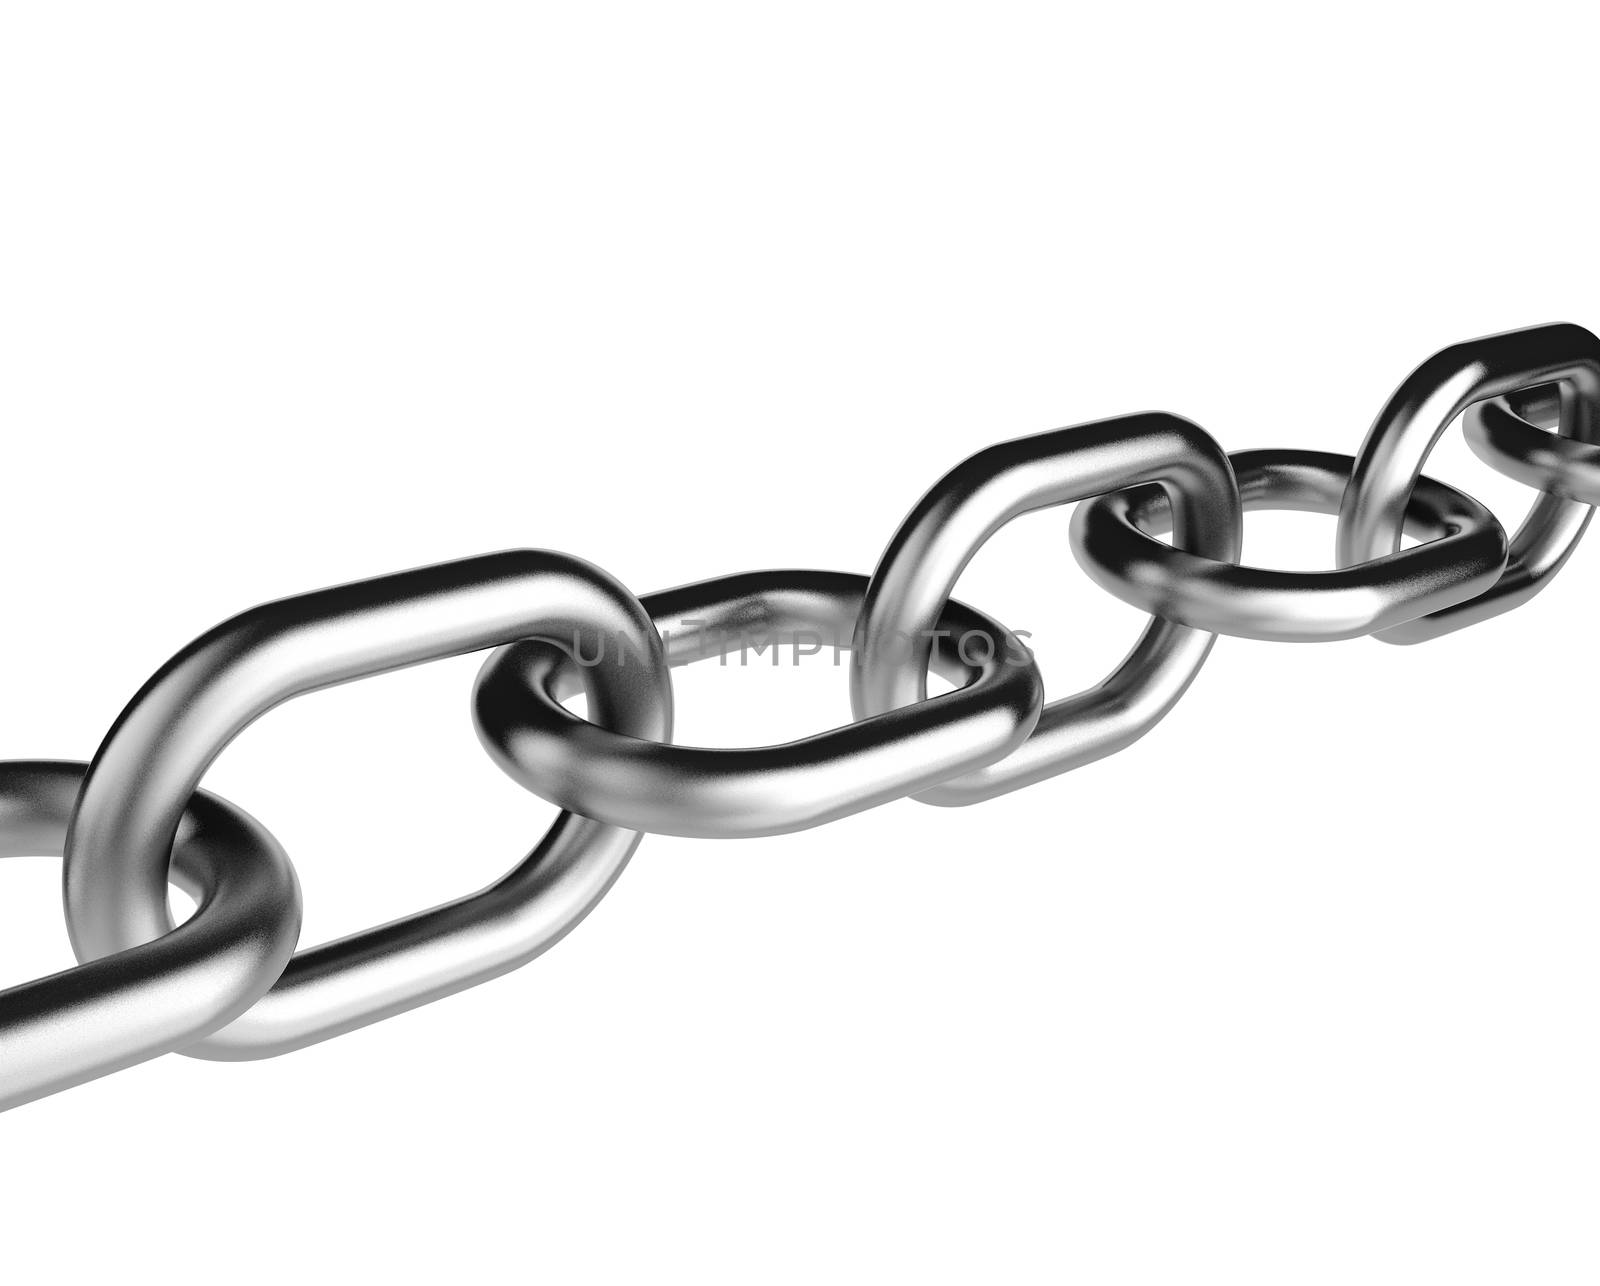 Metal Chain on White Background 3D Illustration